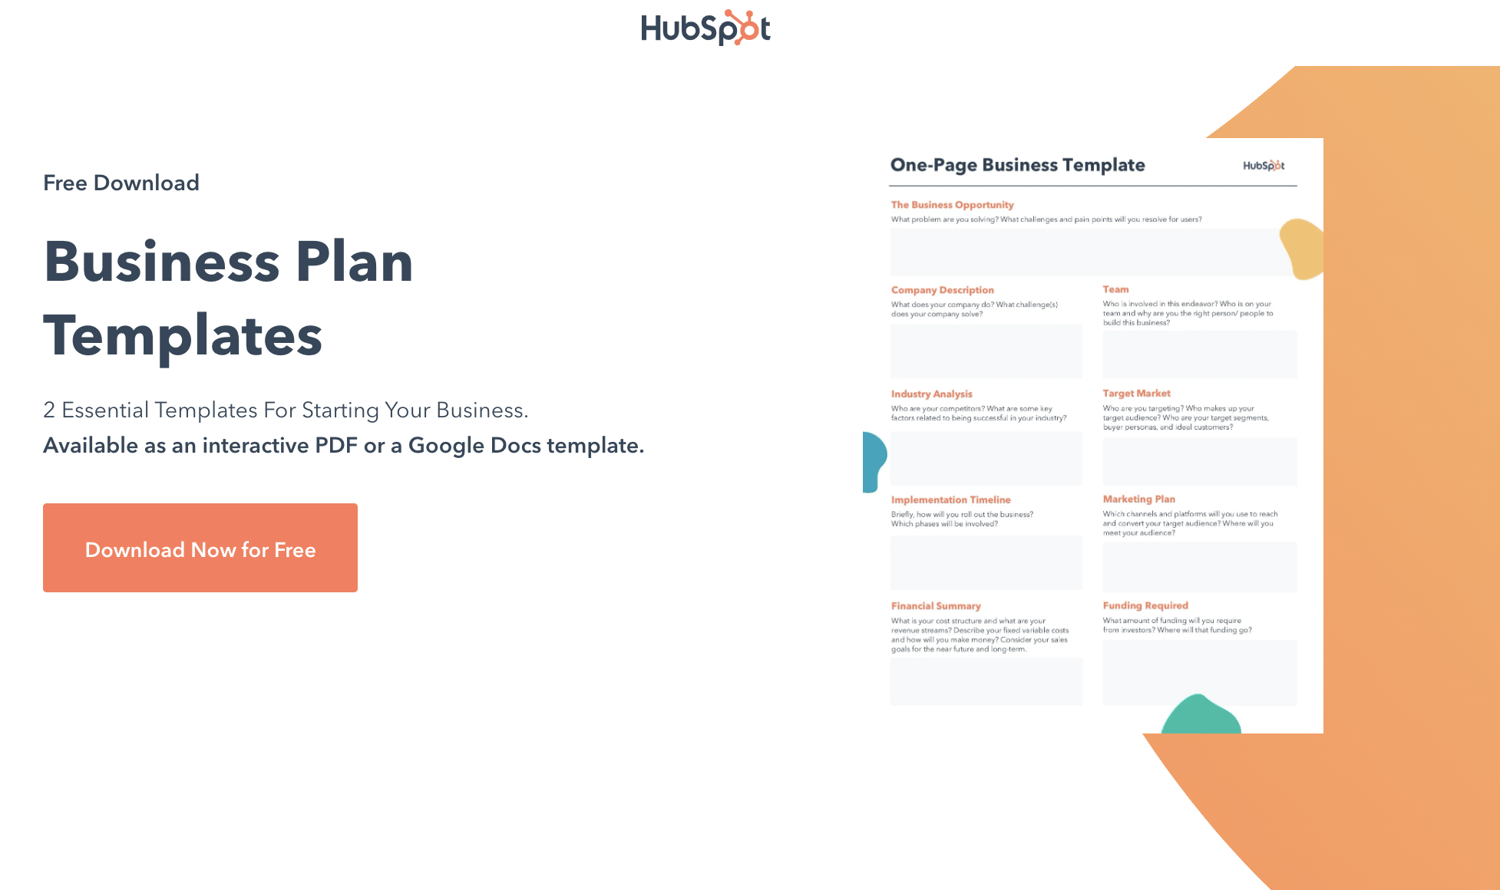 22 Sample Business Plans to Help You Write Your Own Inside Moving Company Business Plan Template